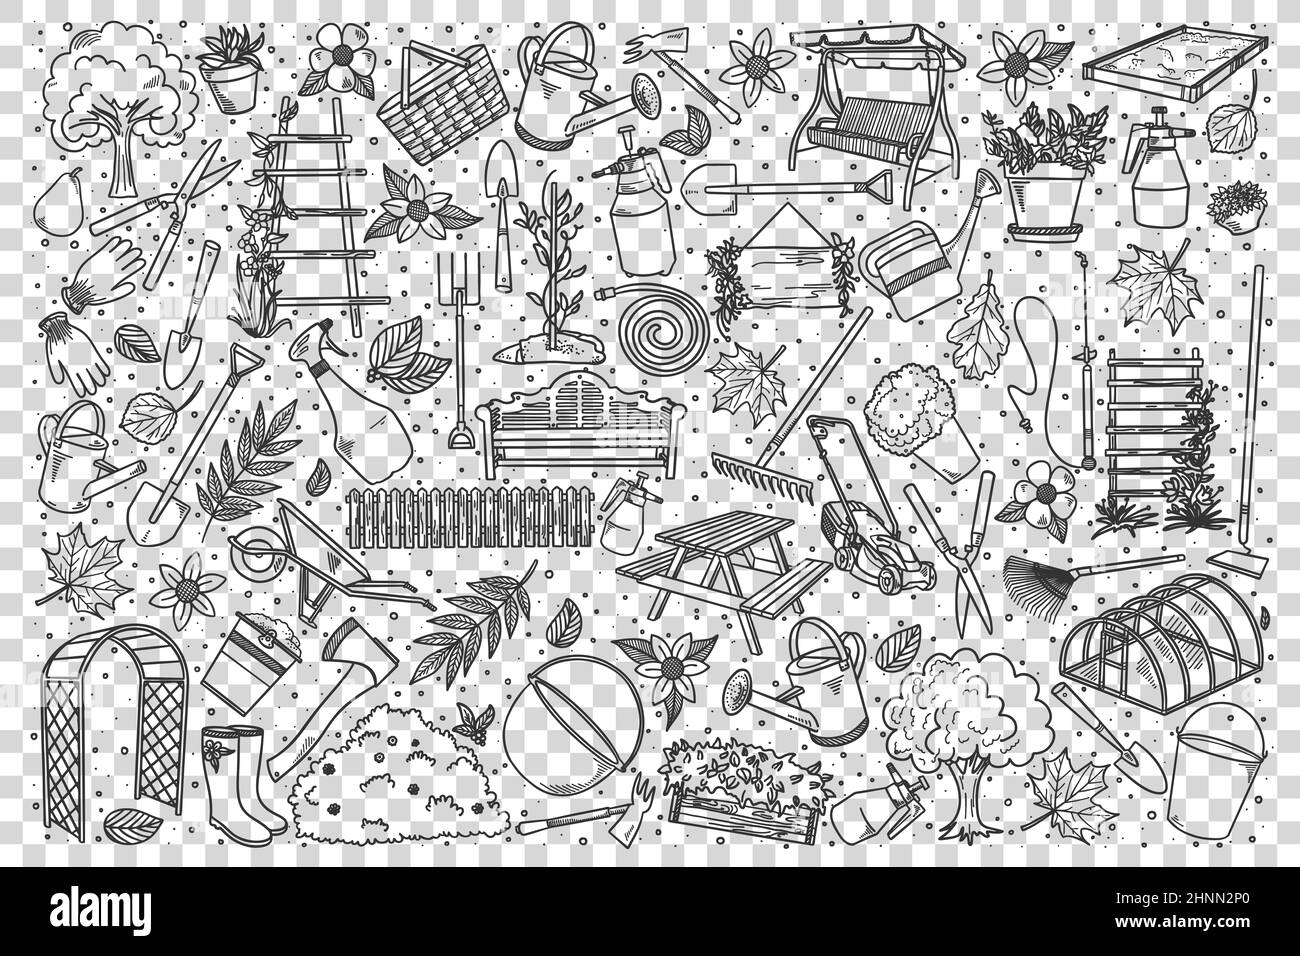 Gardening doodle set. Collection of hand drawn patterns templates of various tools equipment and facilities for garden or farming and agriculture. Fre Stock Photo